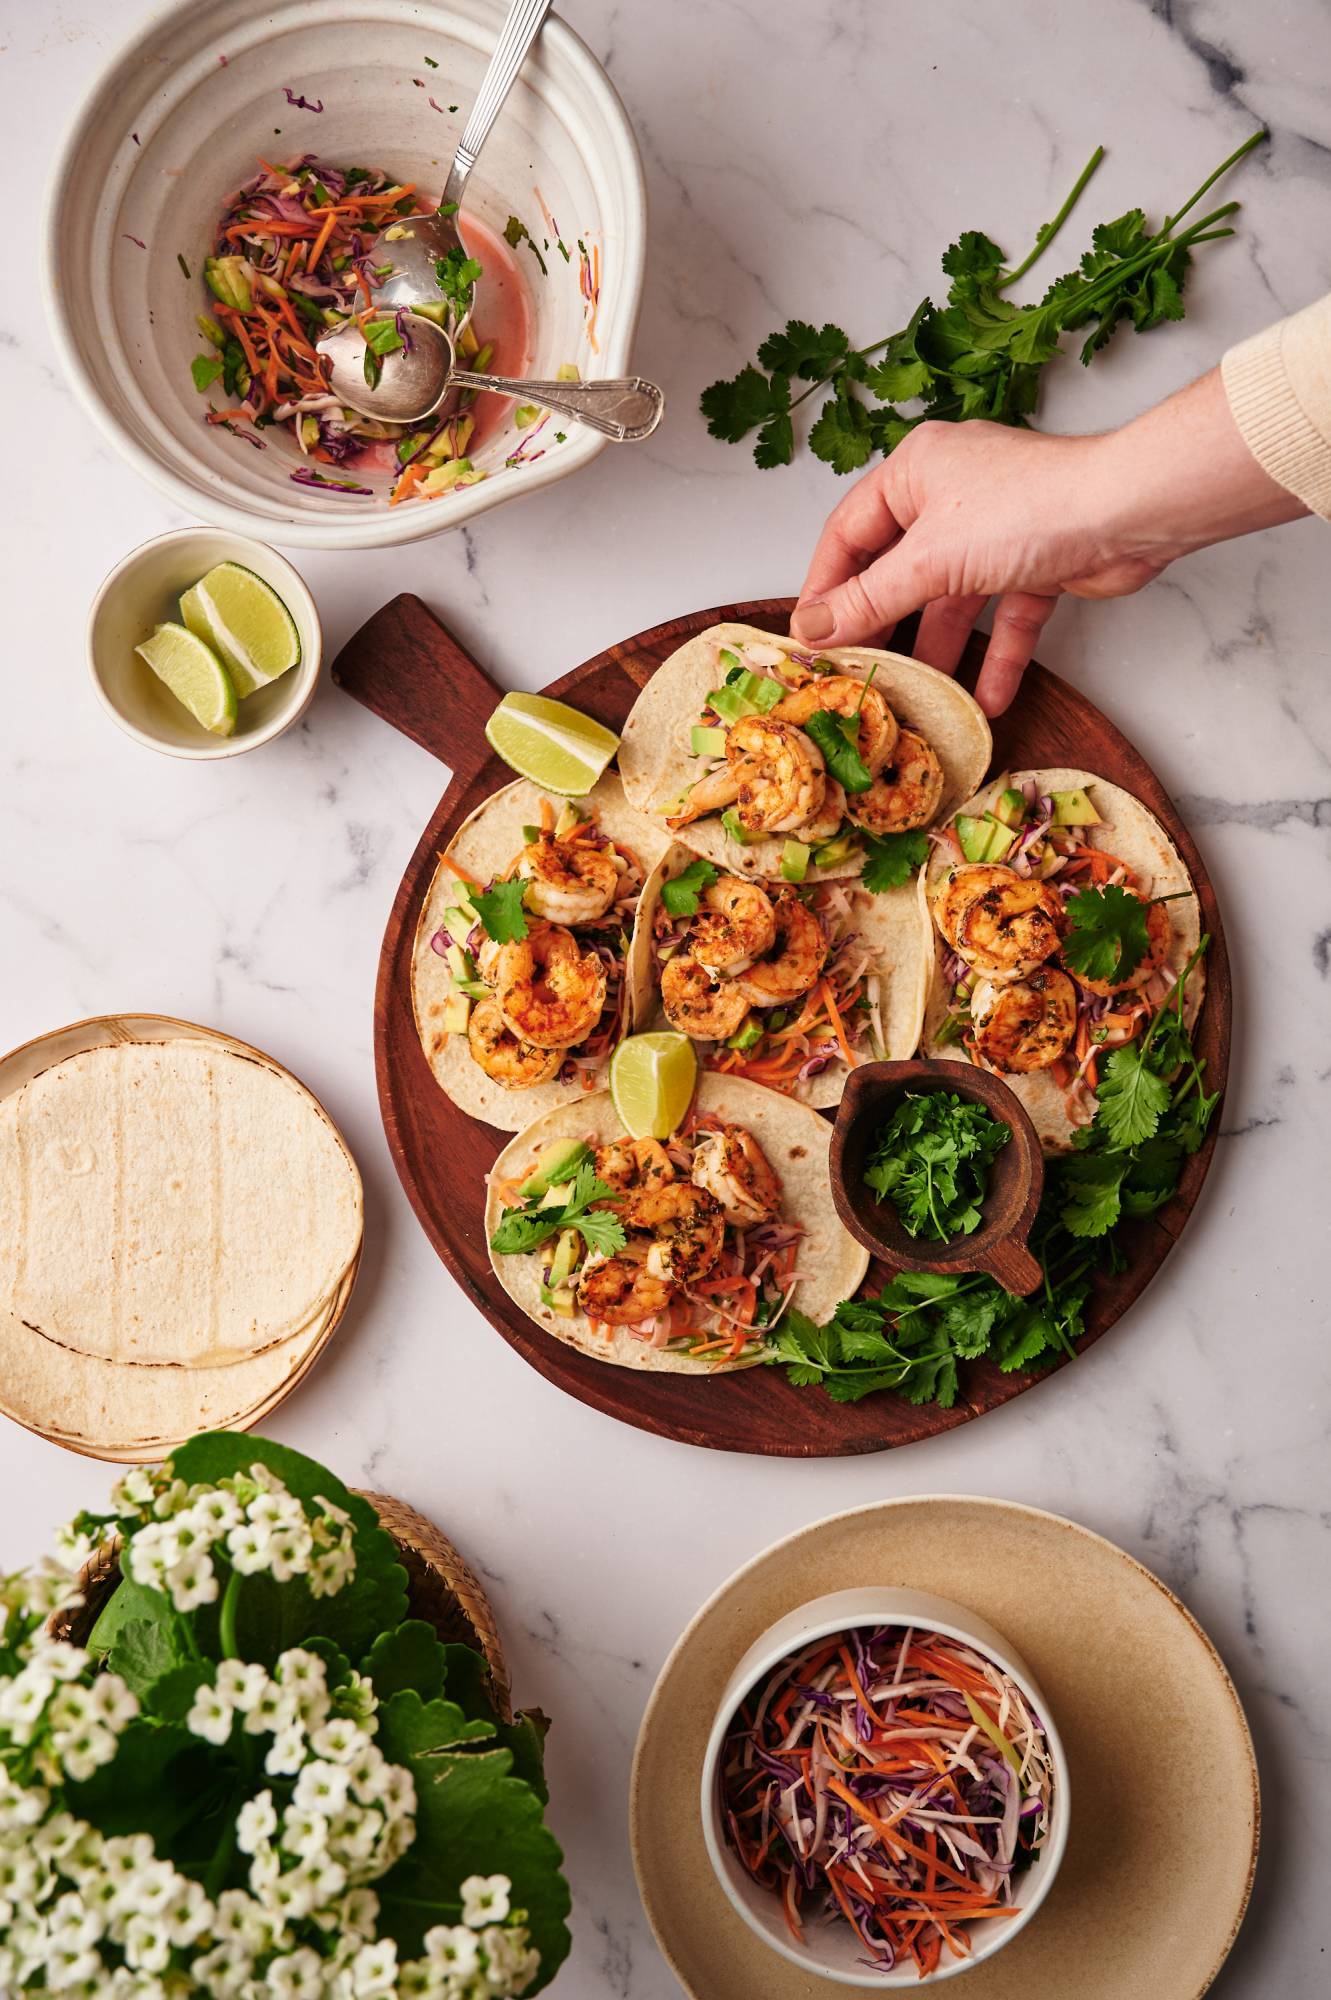 Easy shrimp tacos with shredded cabbage and avocado salsa served on corn tortillas with limes.